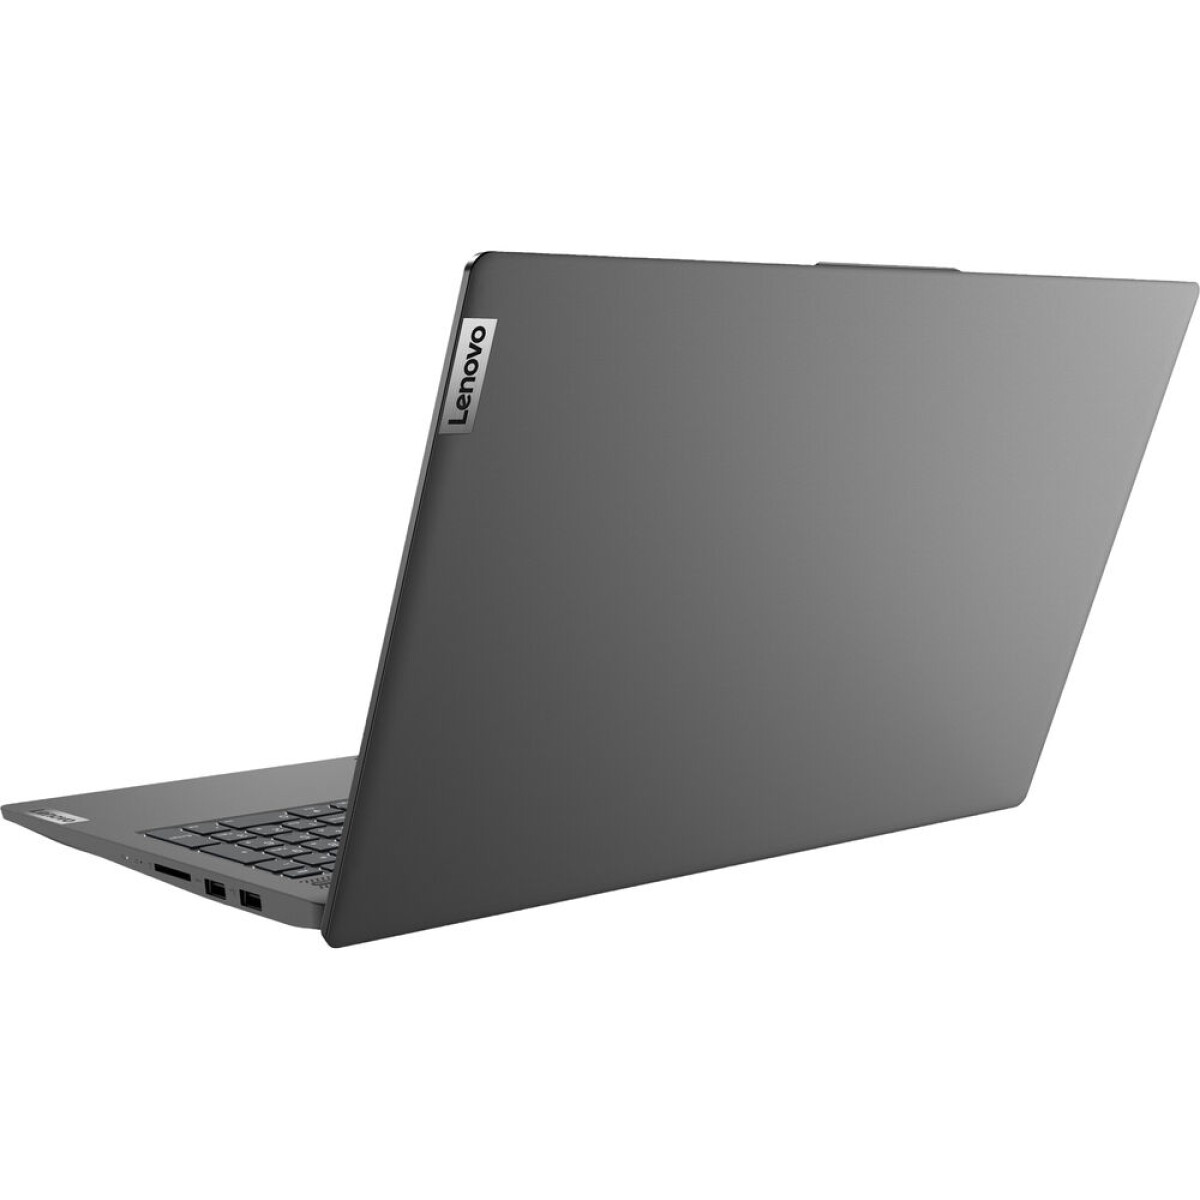 Notebook Lenovo Core I7 4.7GHZ, 8GB, 512GB Ssd, 15.6" Fhd Touch 